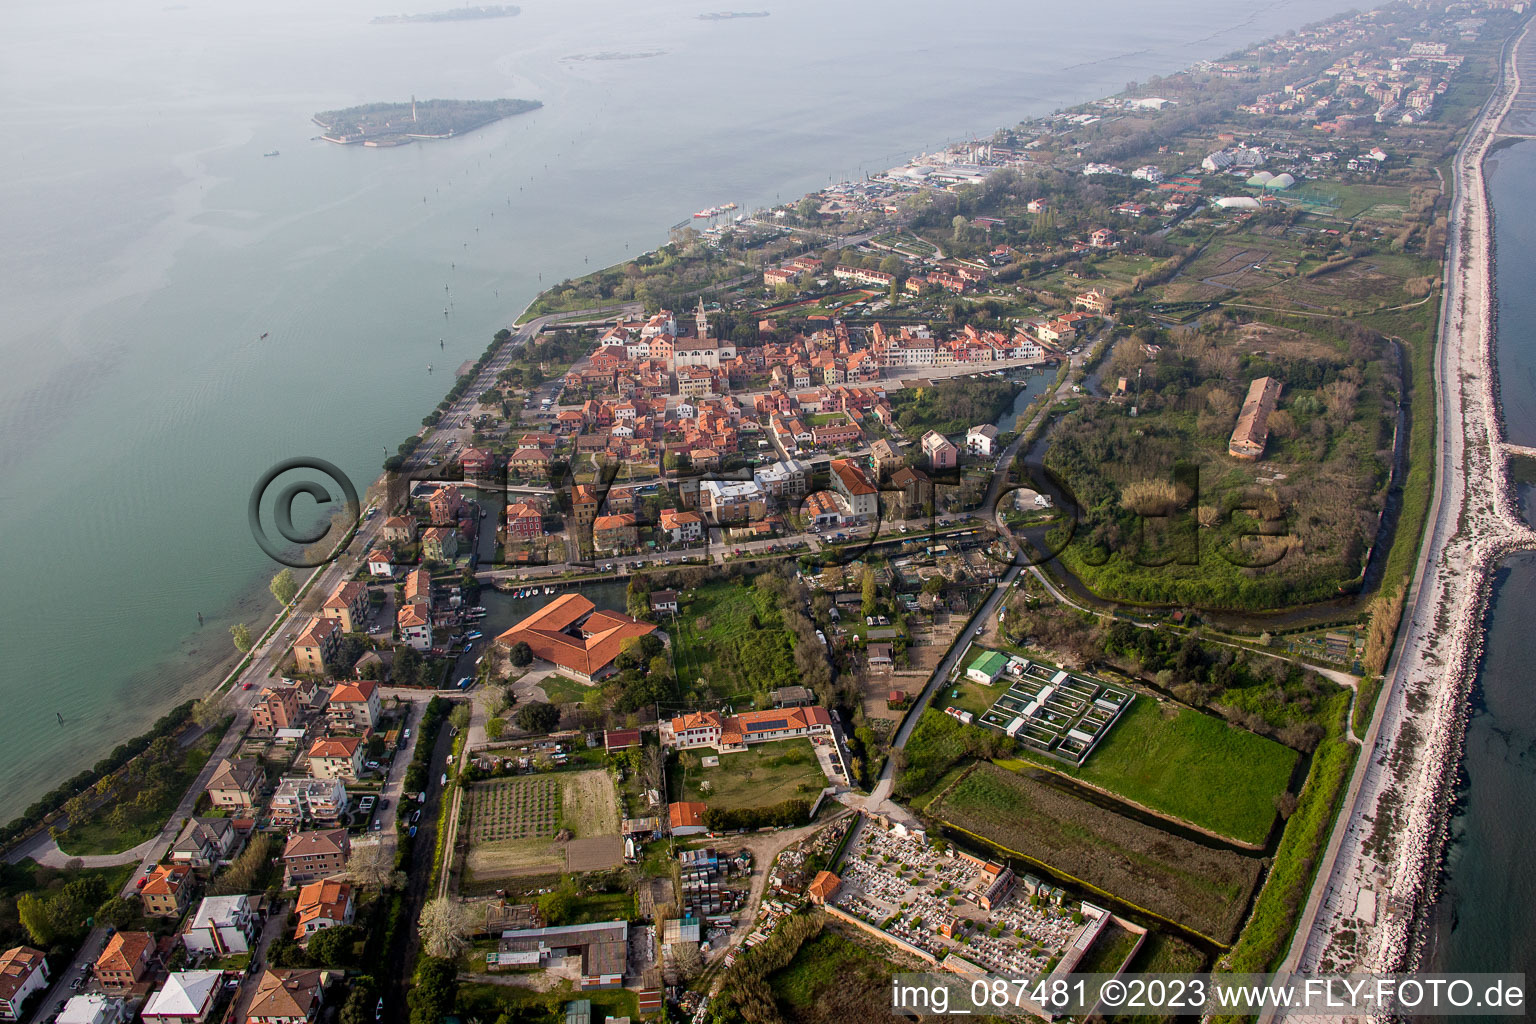 Malamocco in the state Veneto, Italy from above